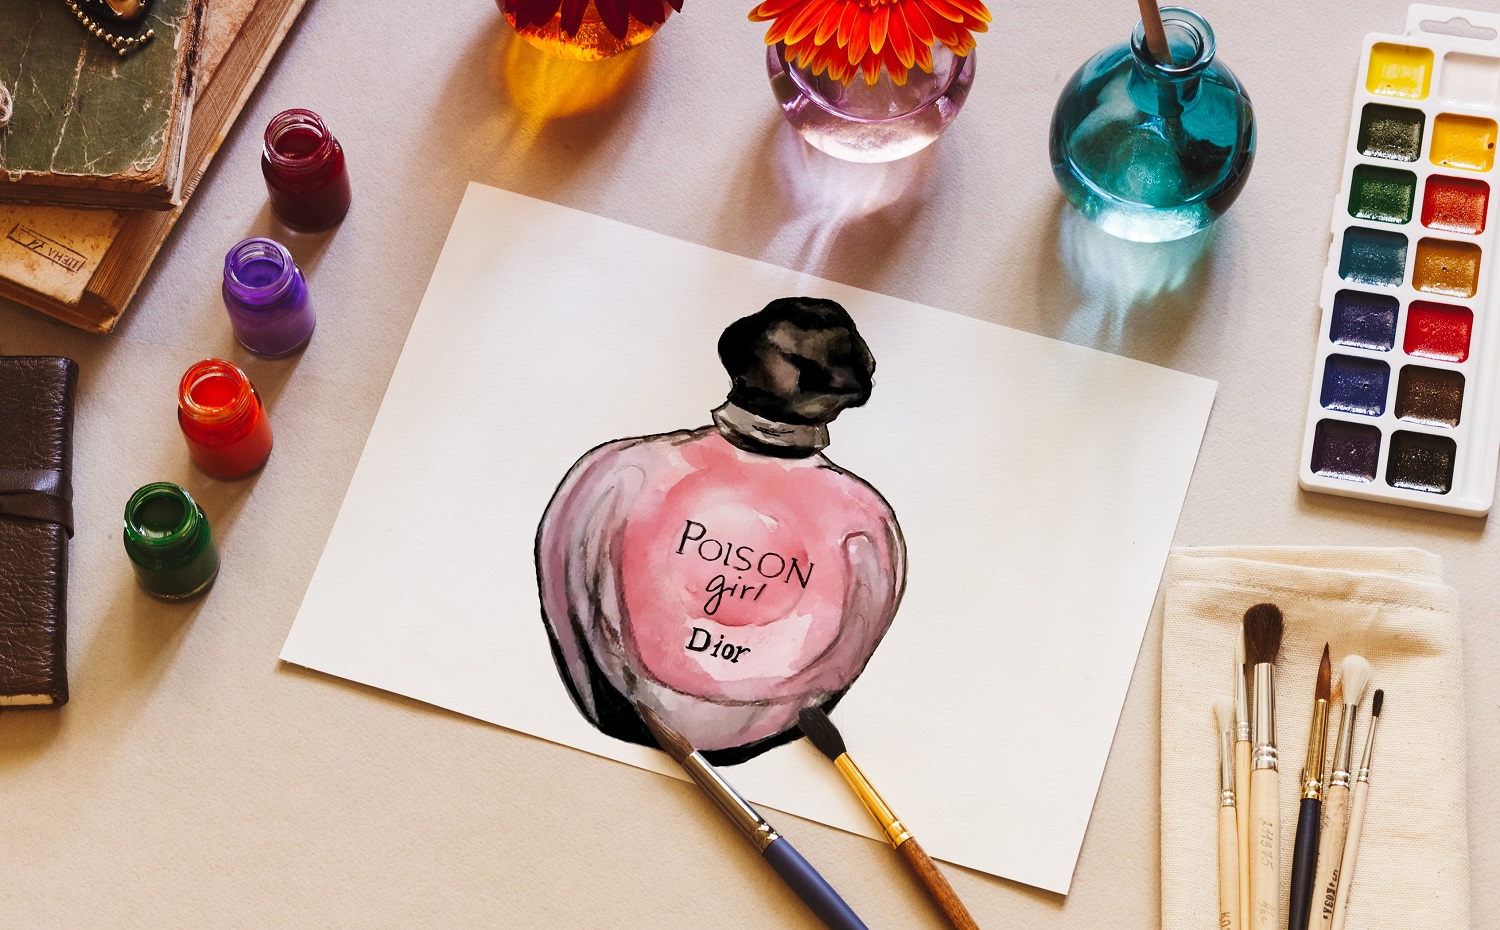 Dior Poison girl watercolor perfume illustration by Stella visual